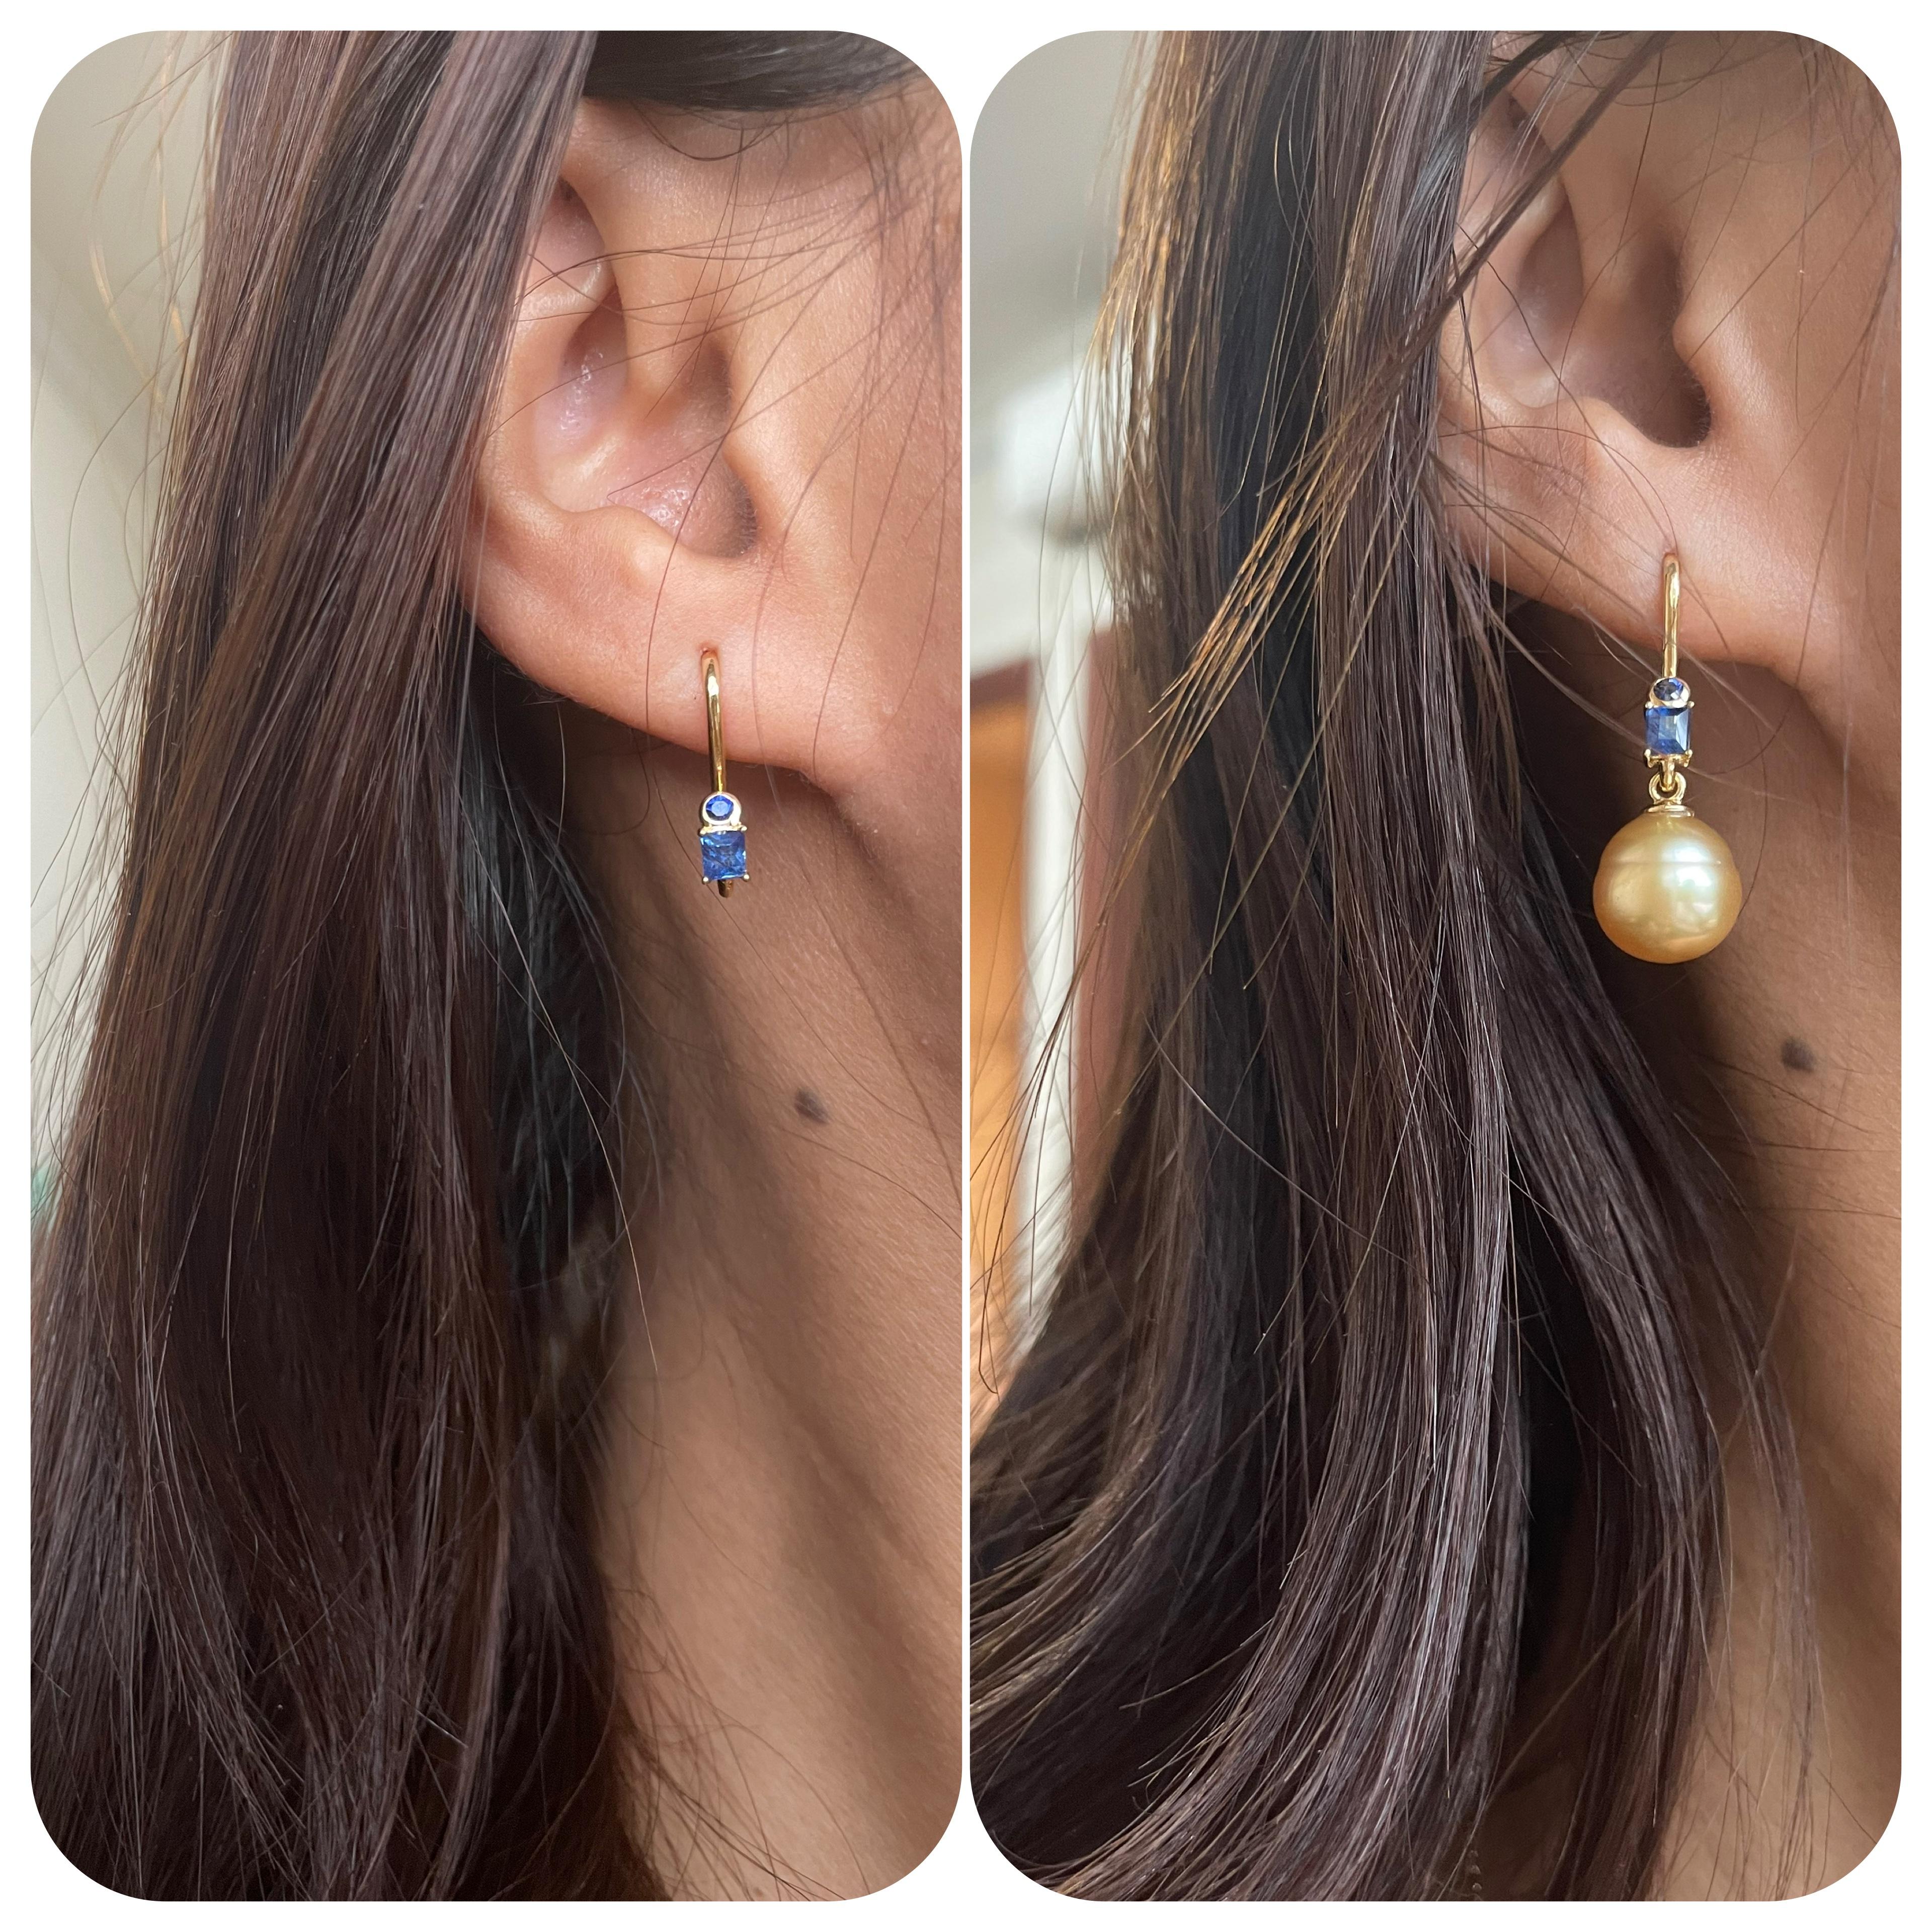 Brilliant Cut French wire earring with unheated blue sapphire earring in 18k solid gold